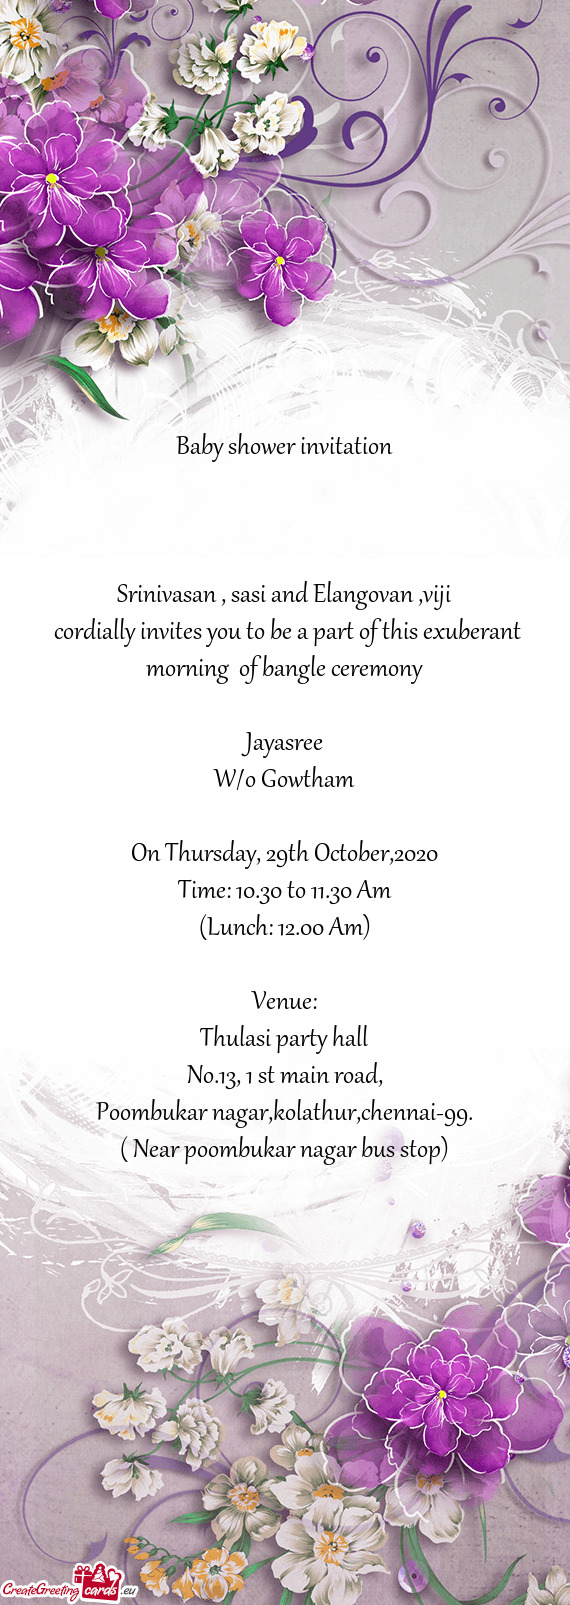 Cordially invites you to be a part of this exuberant morning of bangle ceremony